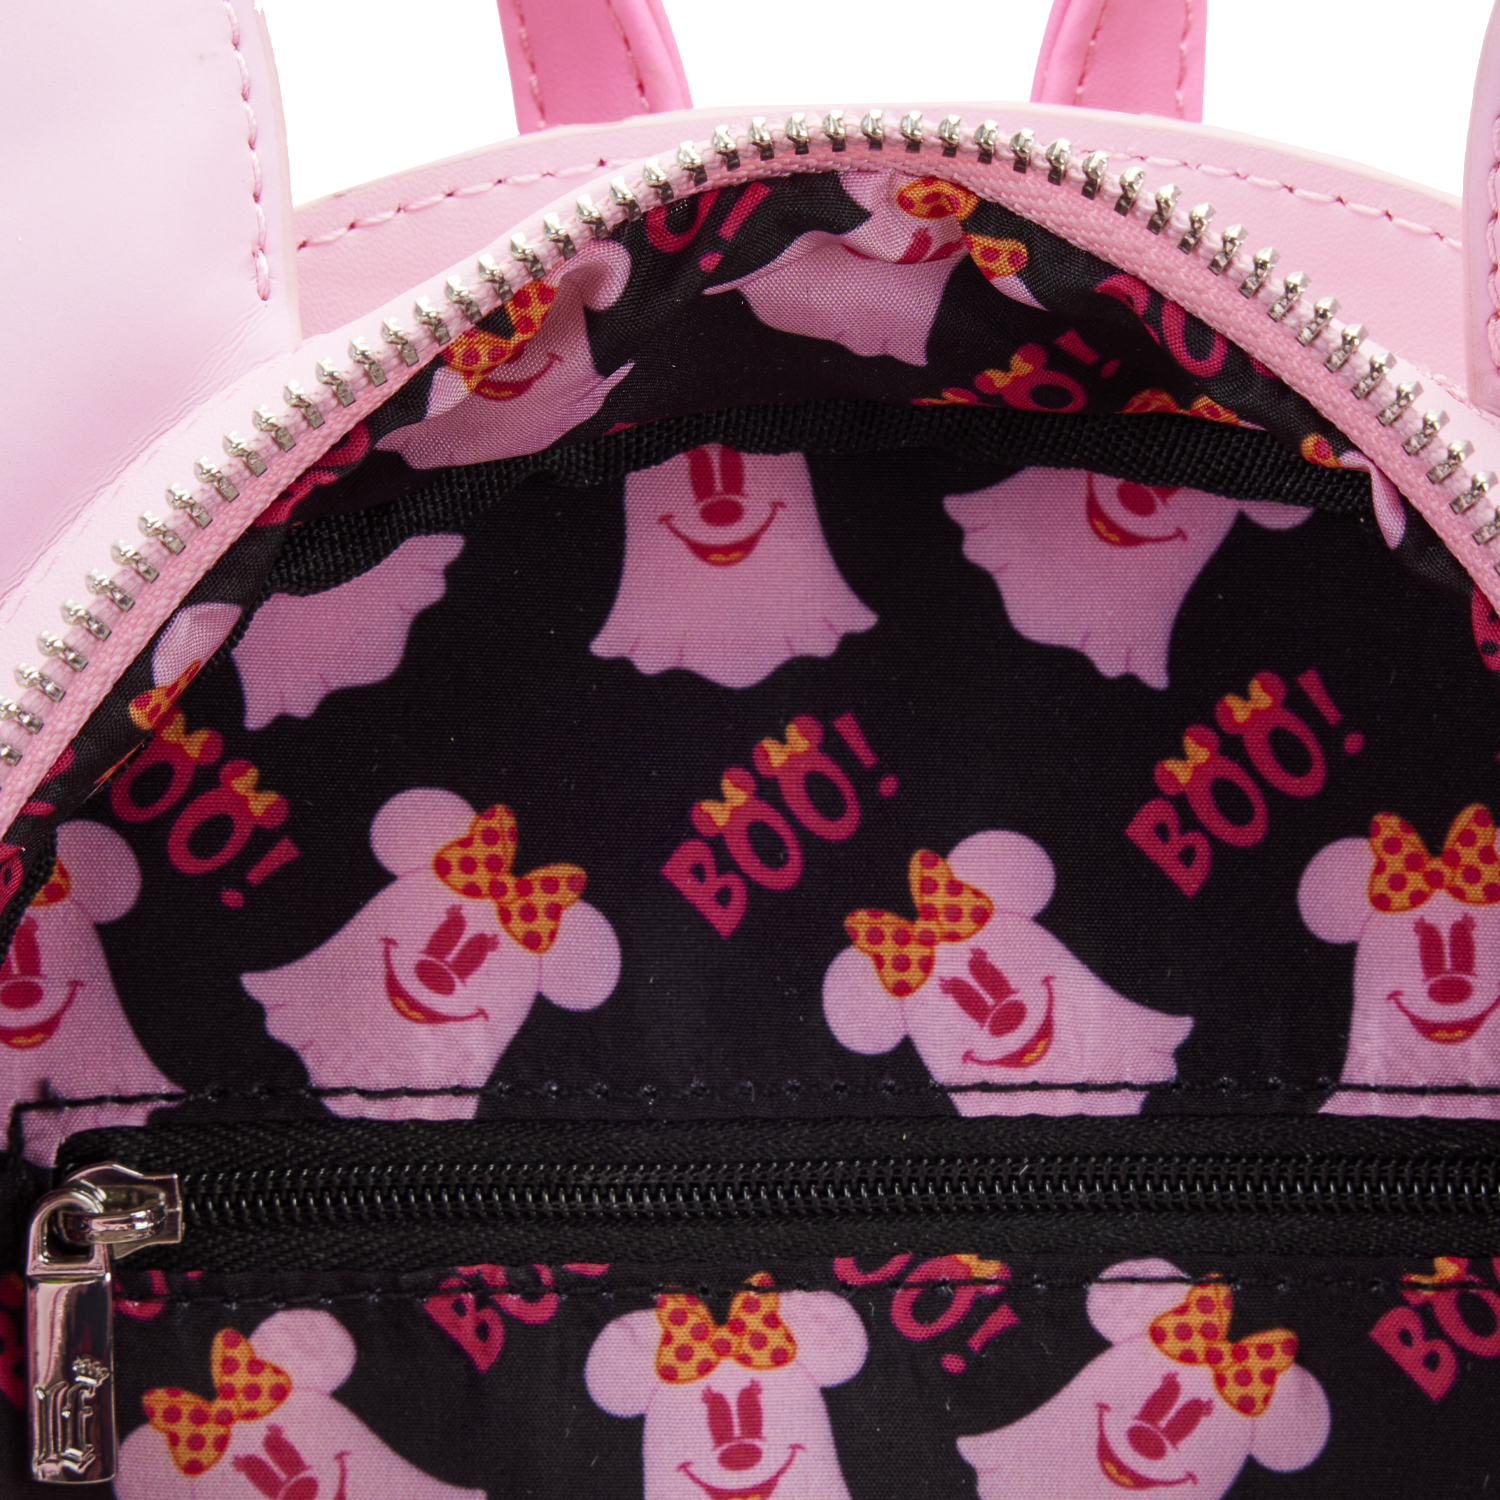 Buy Minnie Mouse Candy Corn Cosplay Mini Backpack at Loungefly.